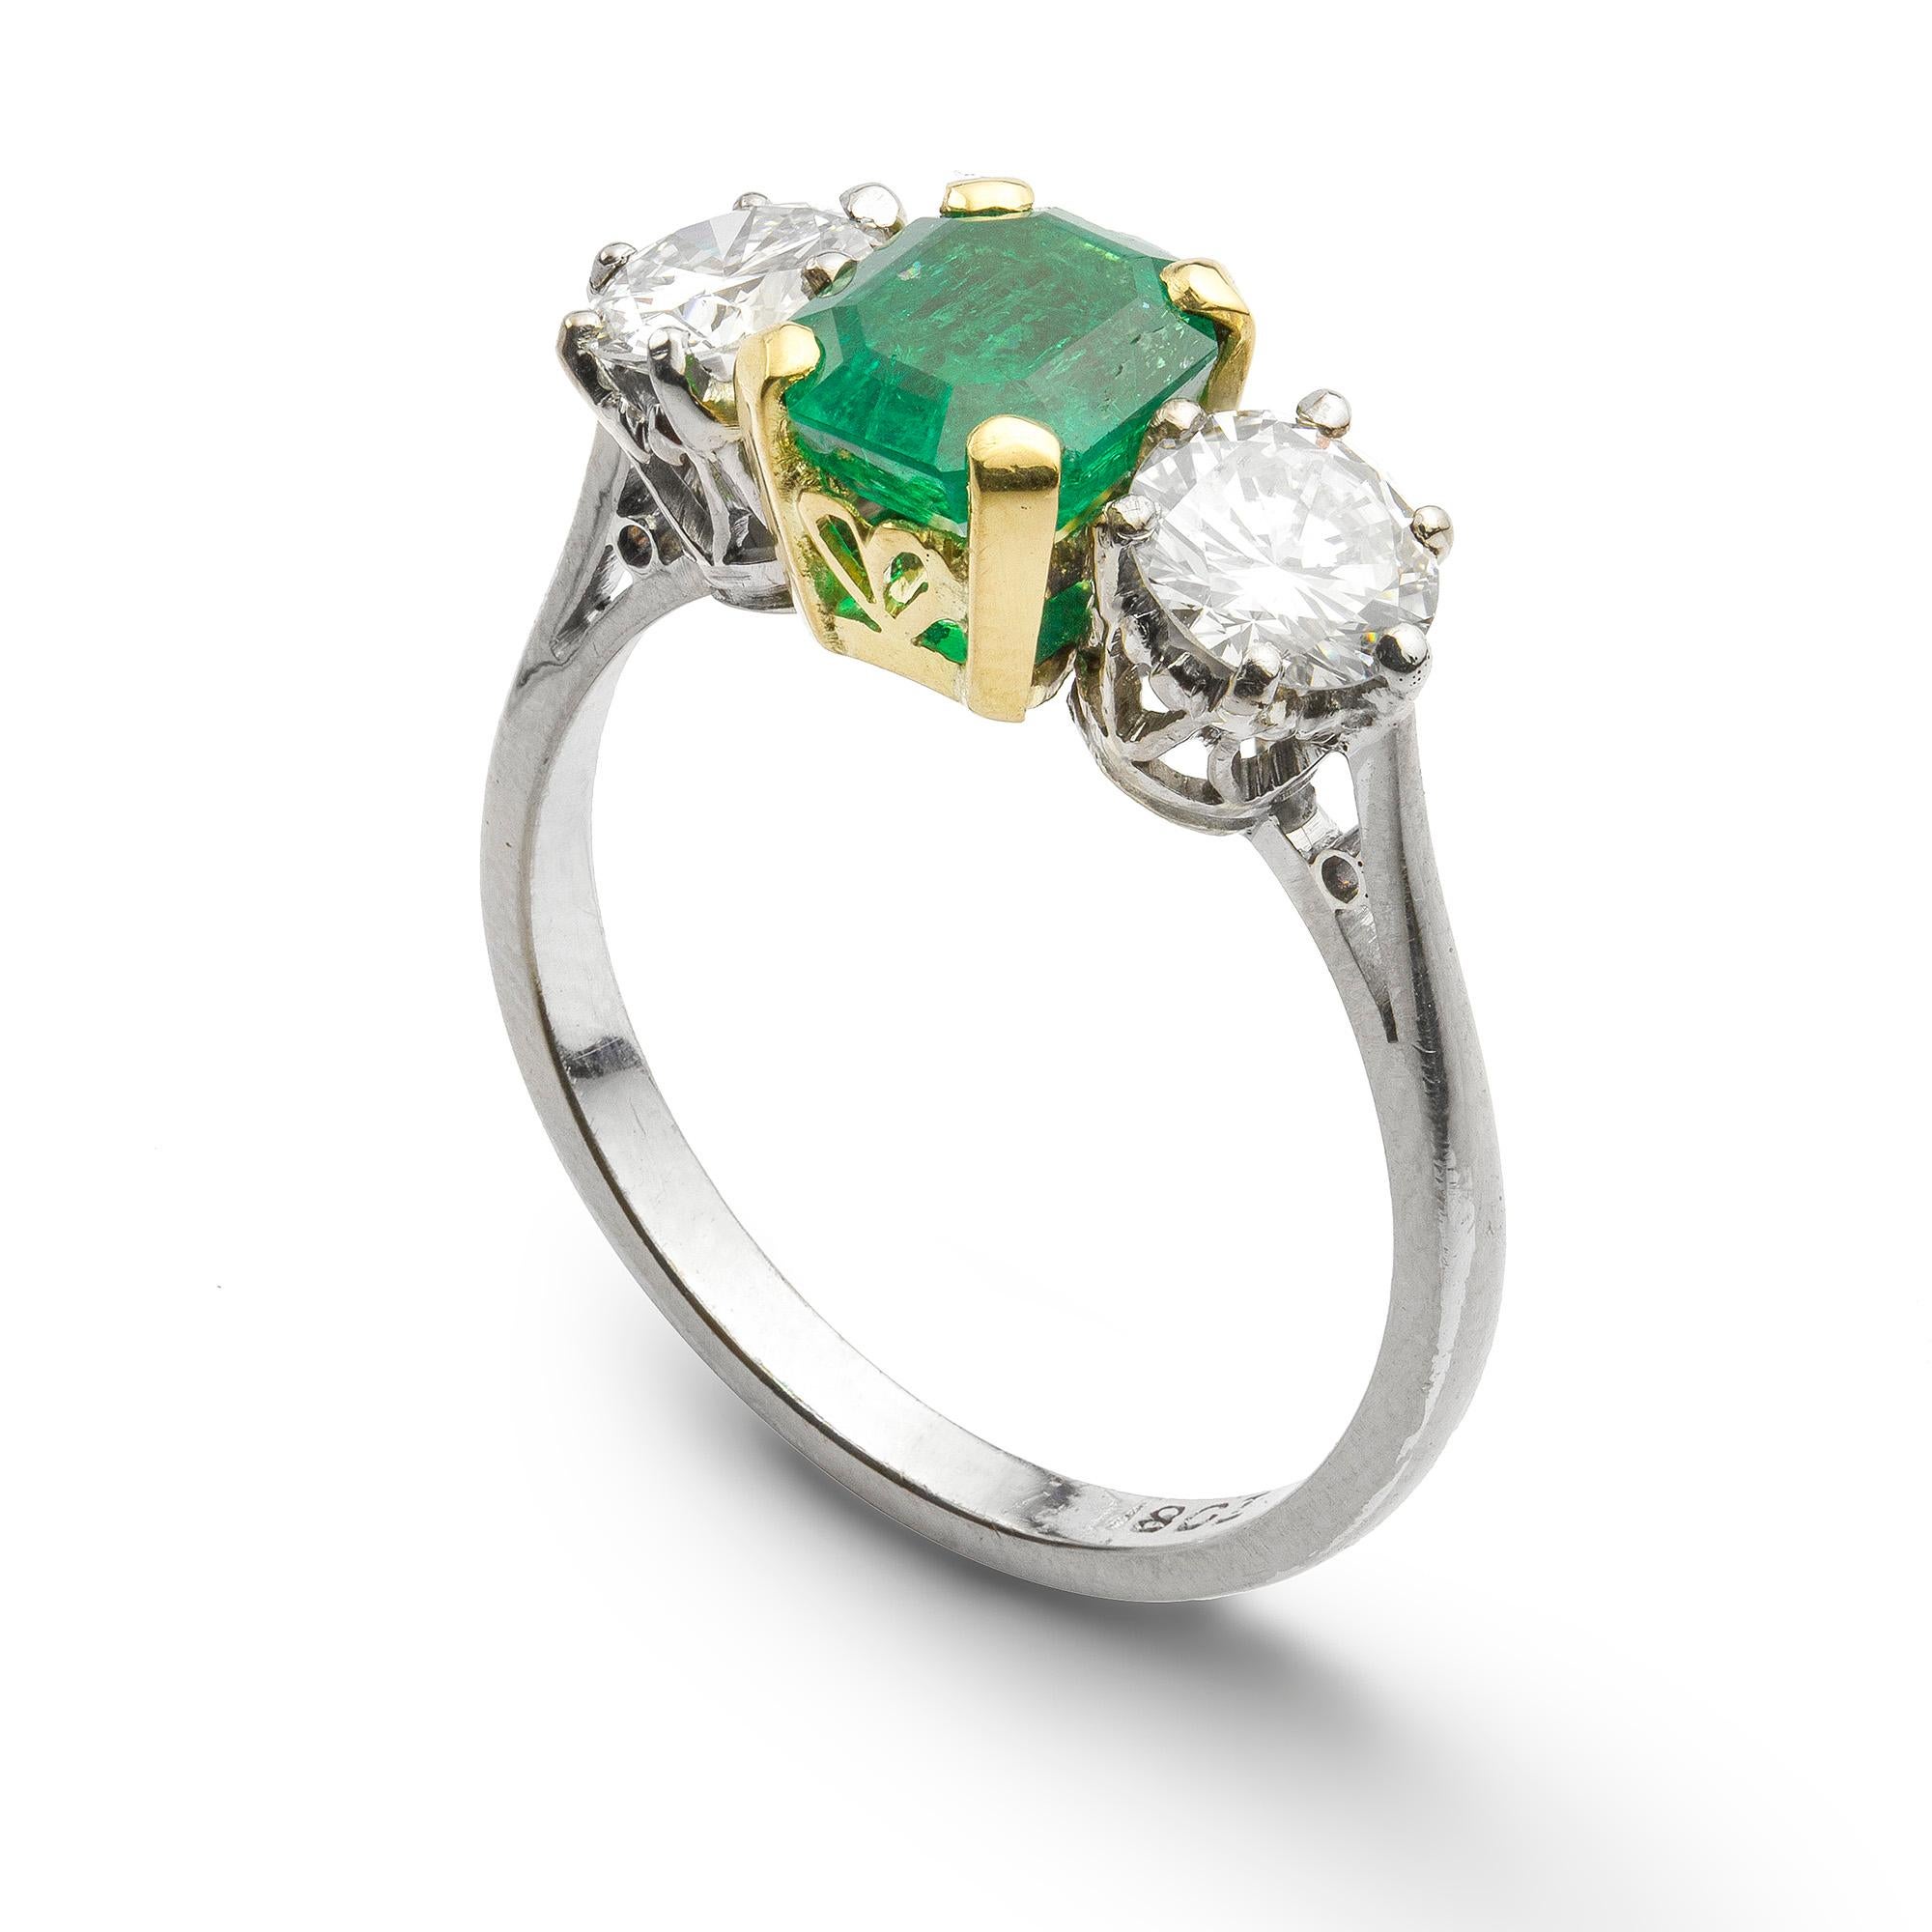 A three stone emerald and diamond ring, the central emerald-cut emerald, measuring approximately 7.0 x 6.2 x 4.2mm and weighing 1.34 carats, four claw set in gold, flanked by round brilliant-cut diamonds either side, weighing a total of 1.03 carats,